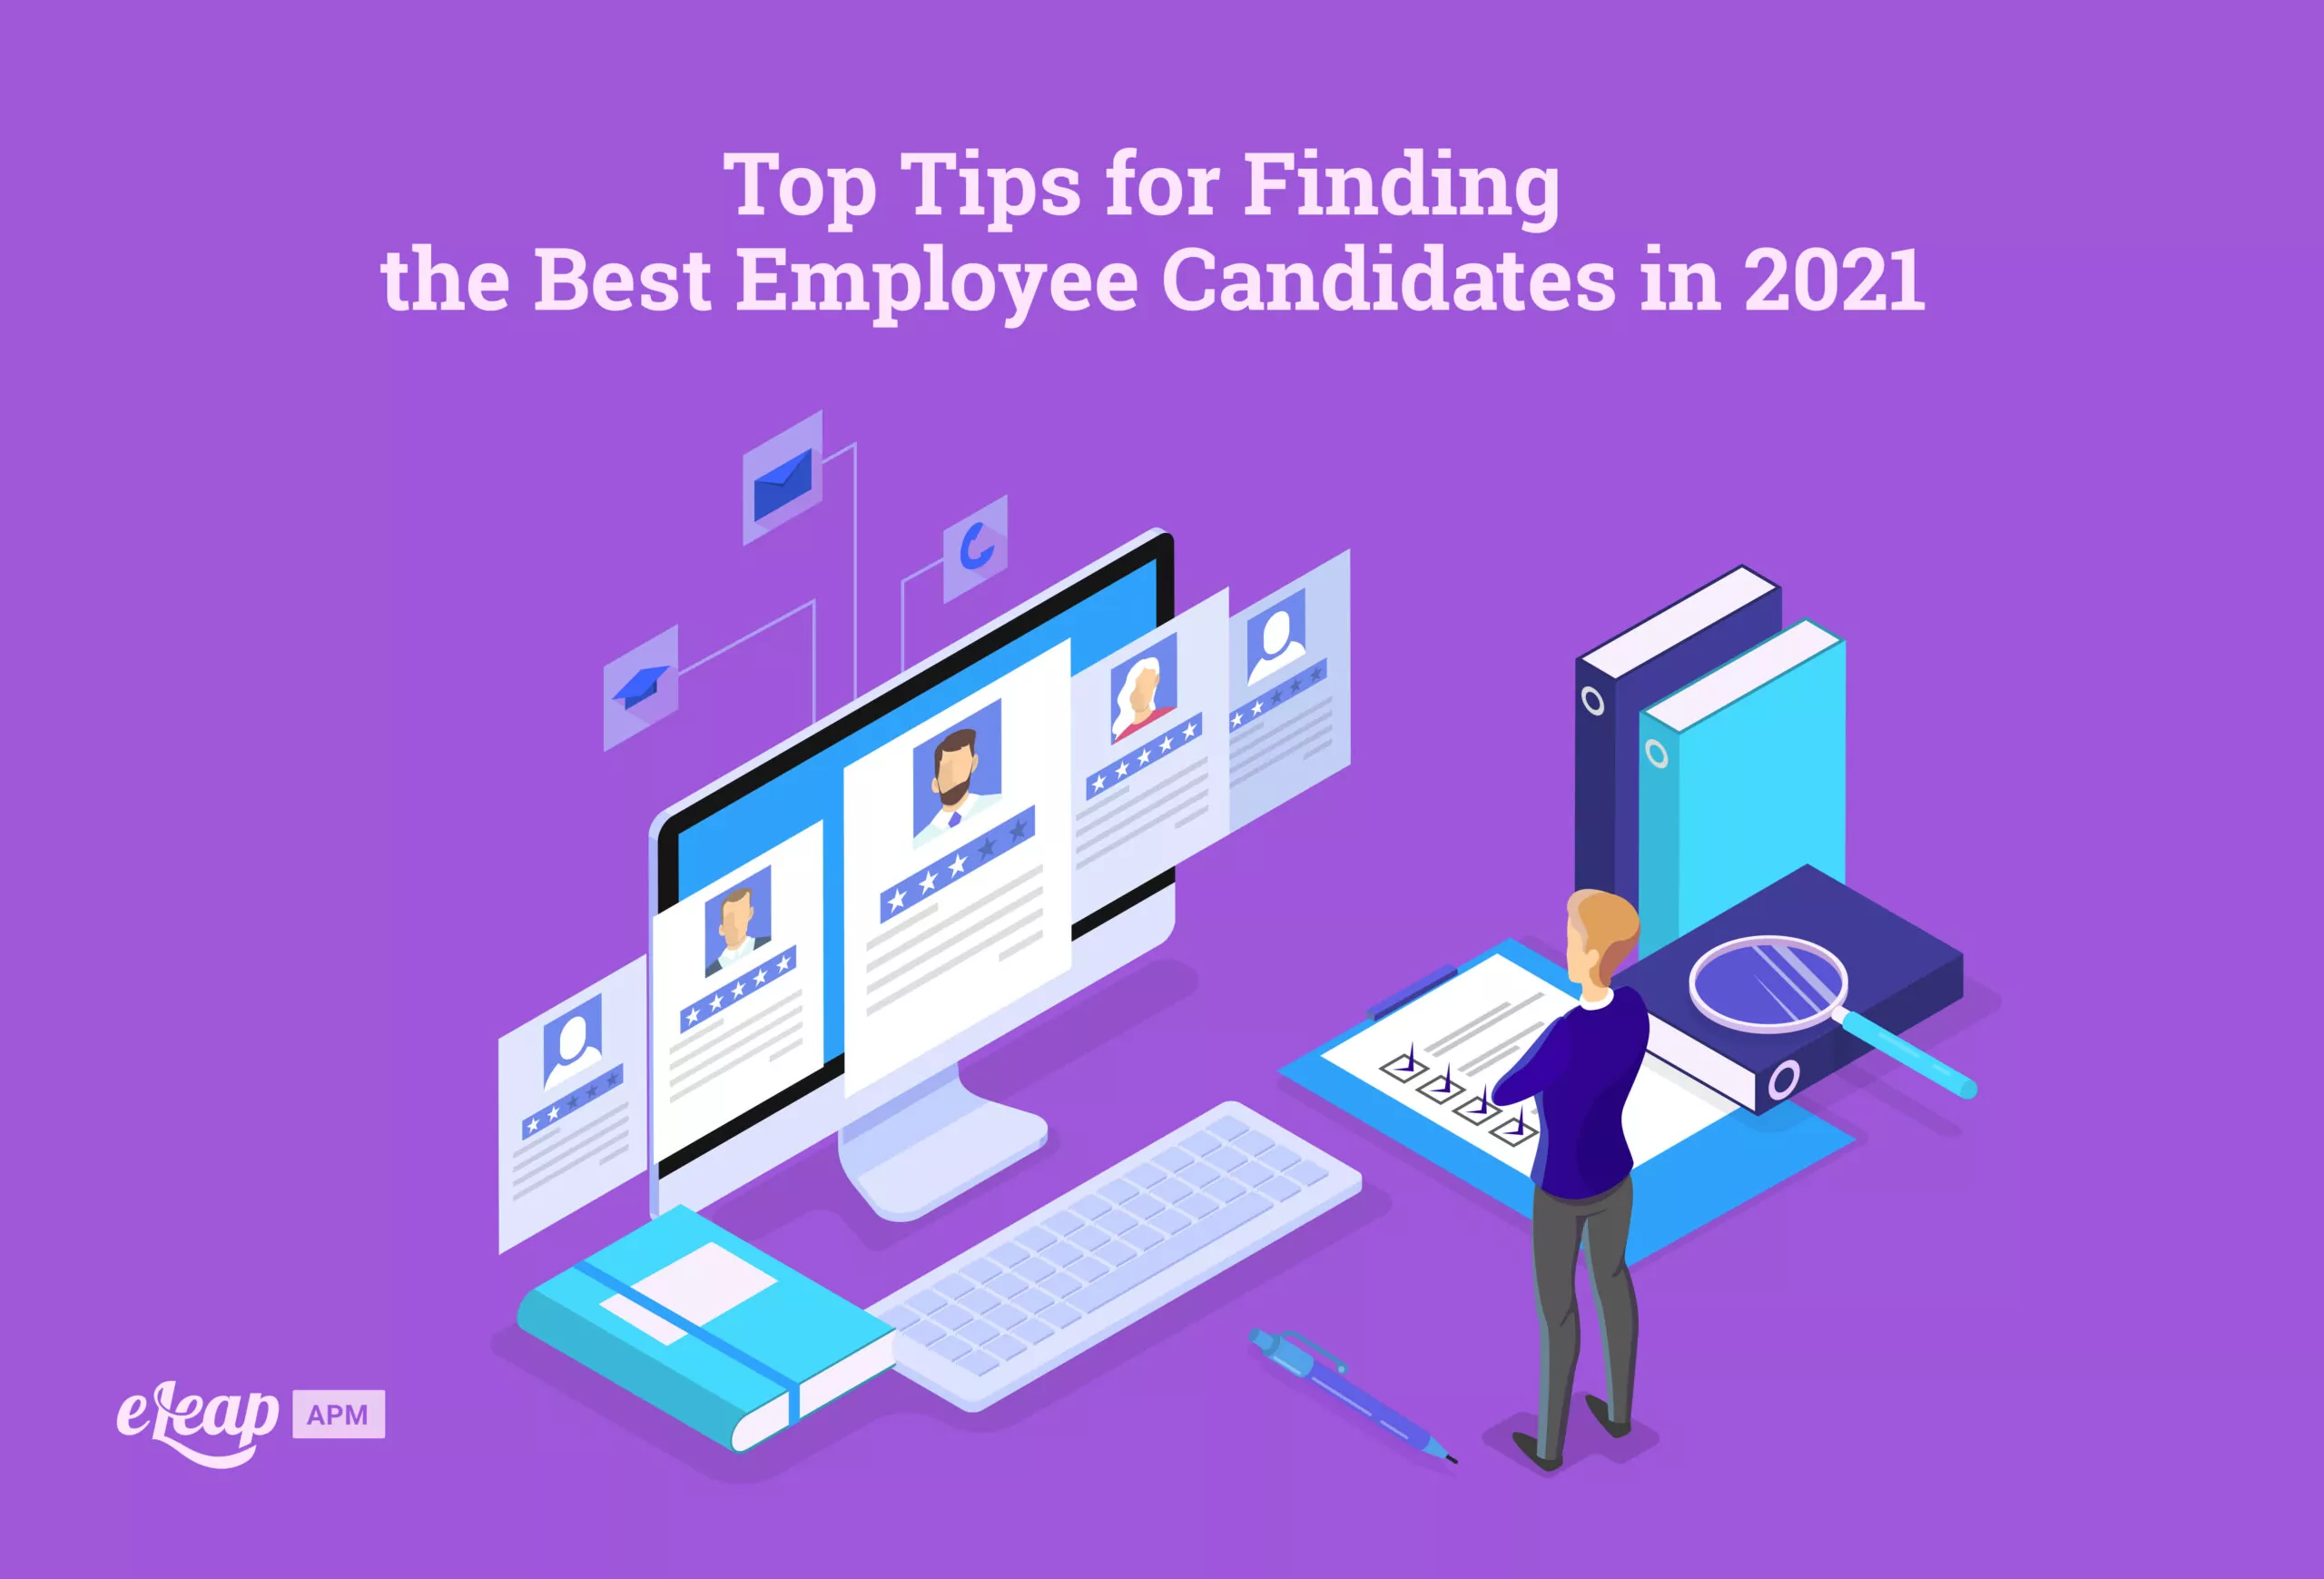 Top Tips for Finding the Best Employee Candidates in 2021